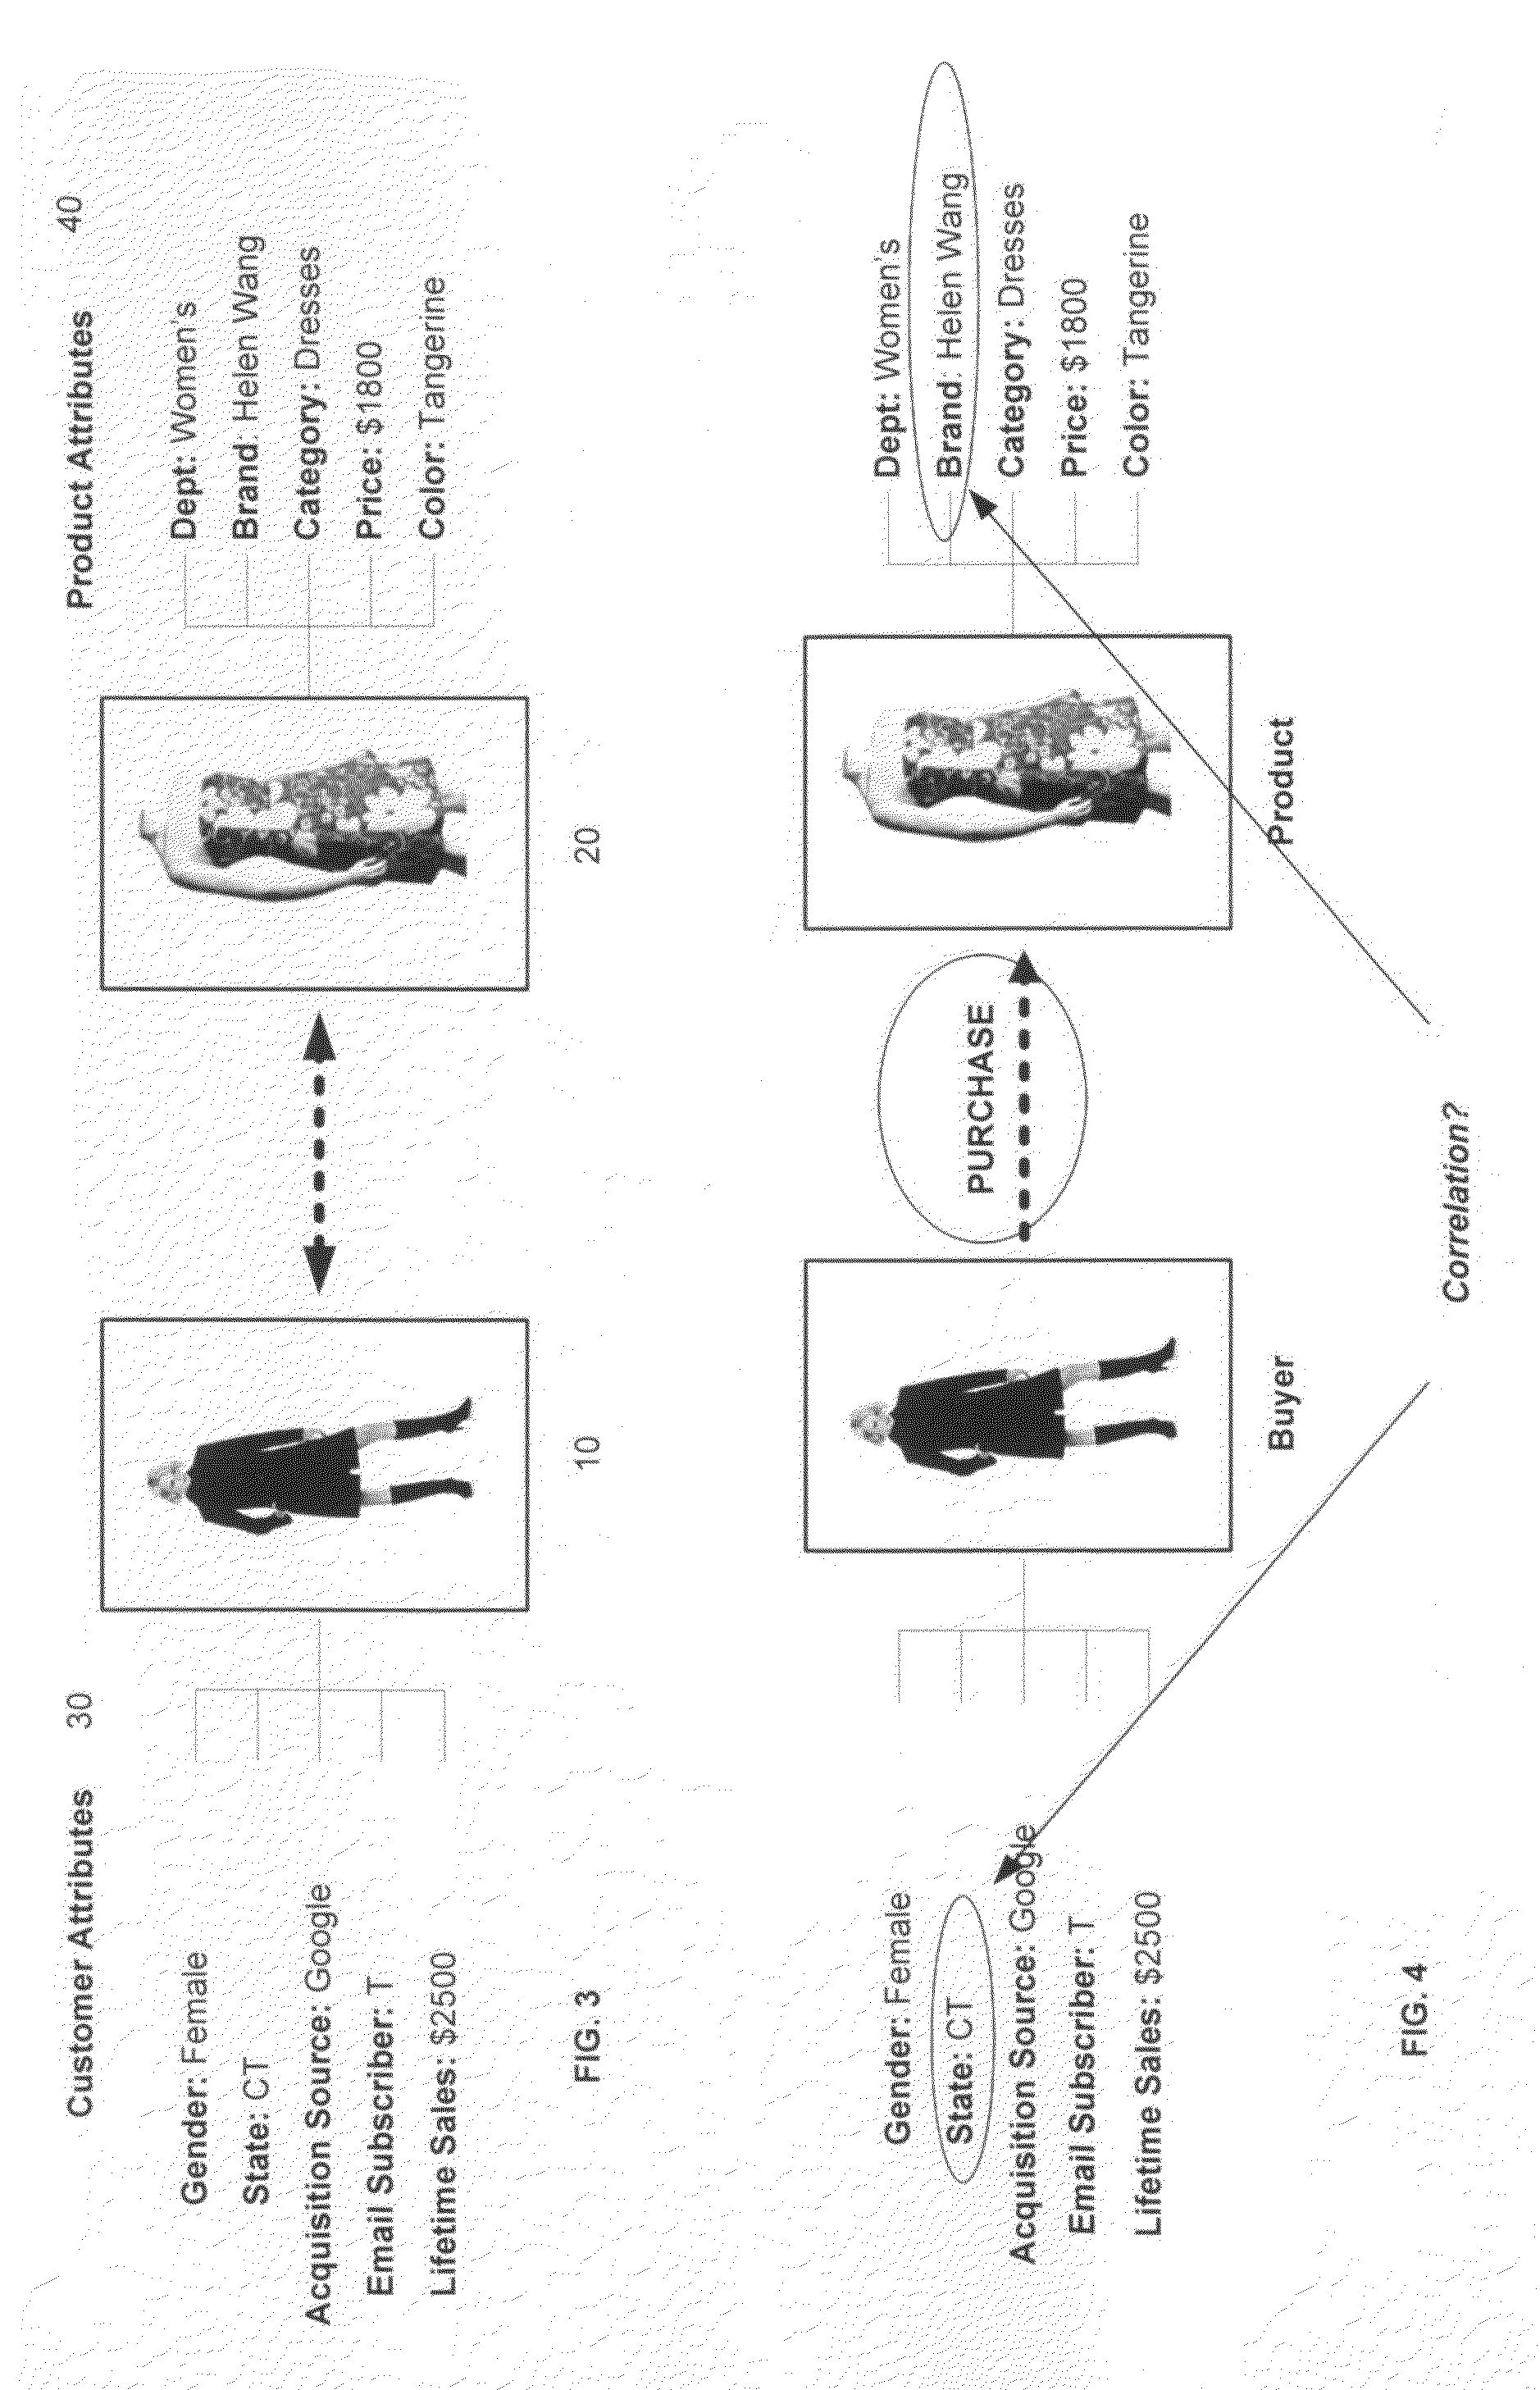 Analytical E-Commerce Processing System And Methods